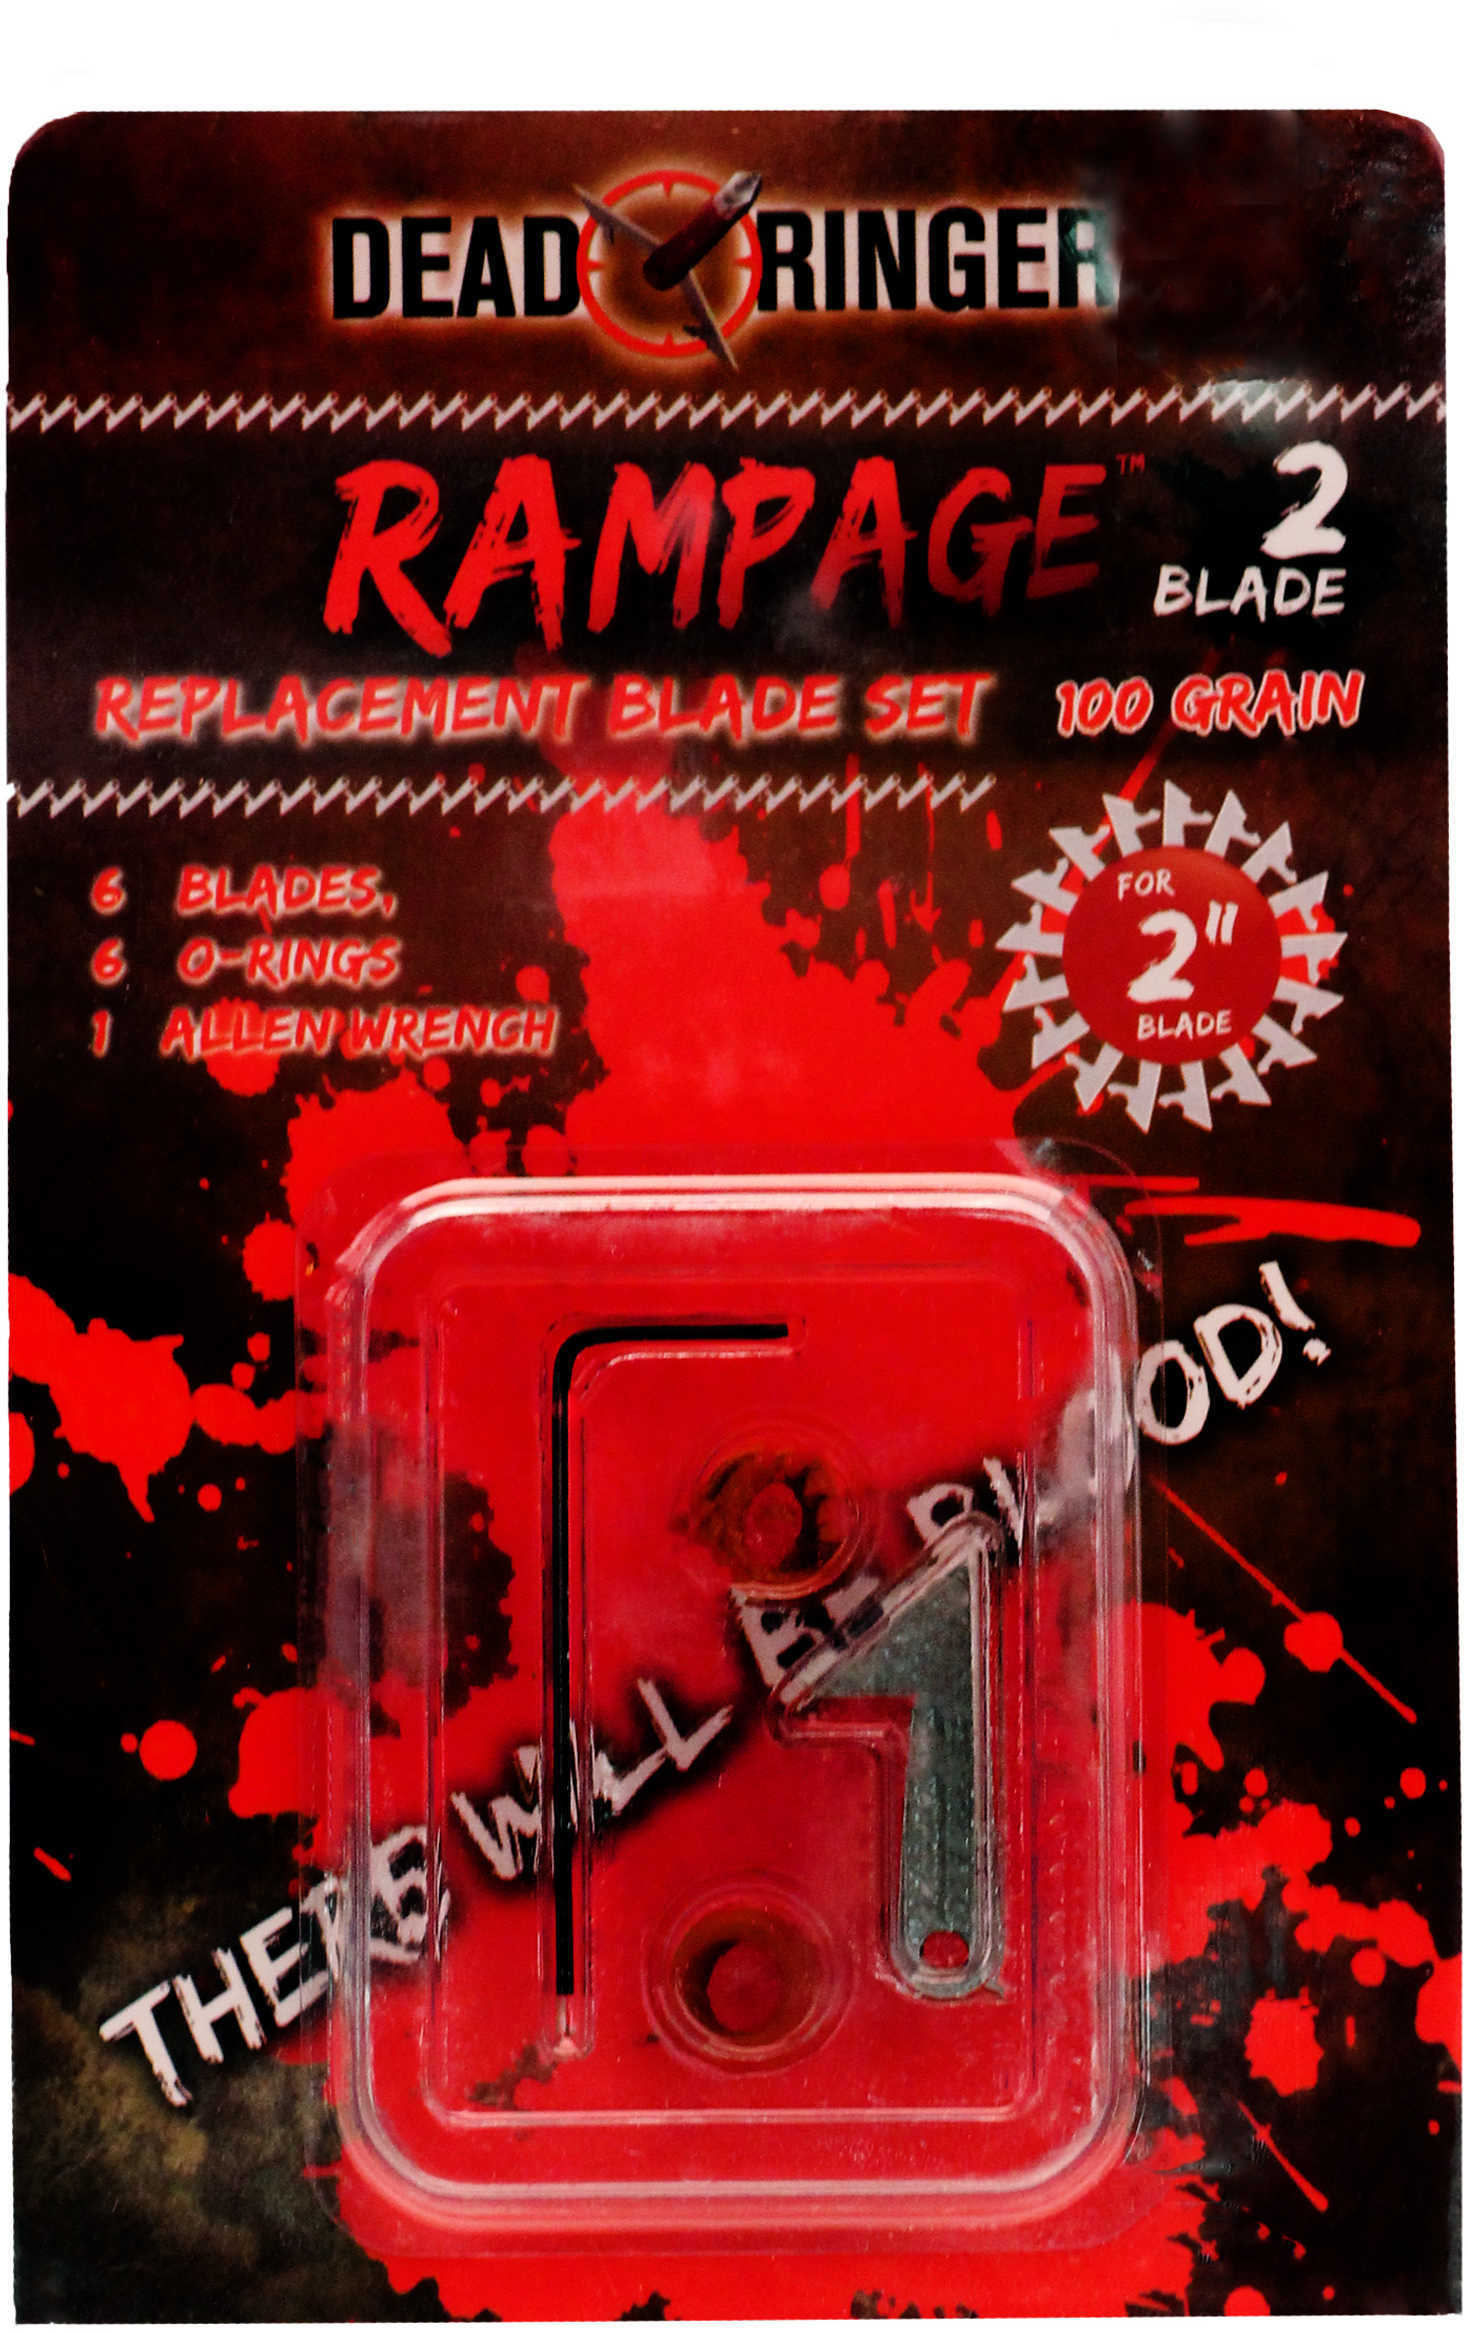 Dead Ringer Rampage 100 grain 2 Blade 2.0" Replacement DR4743